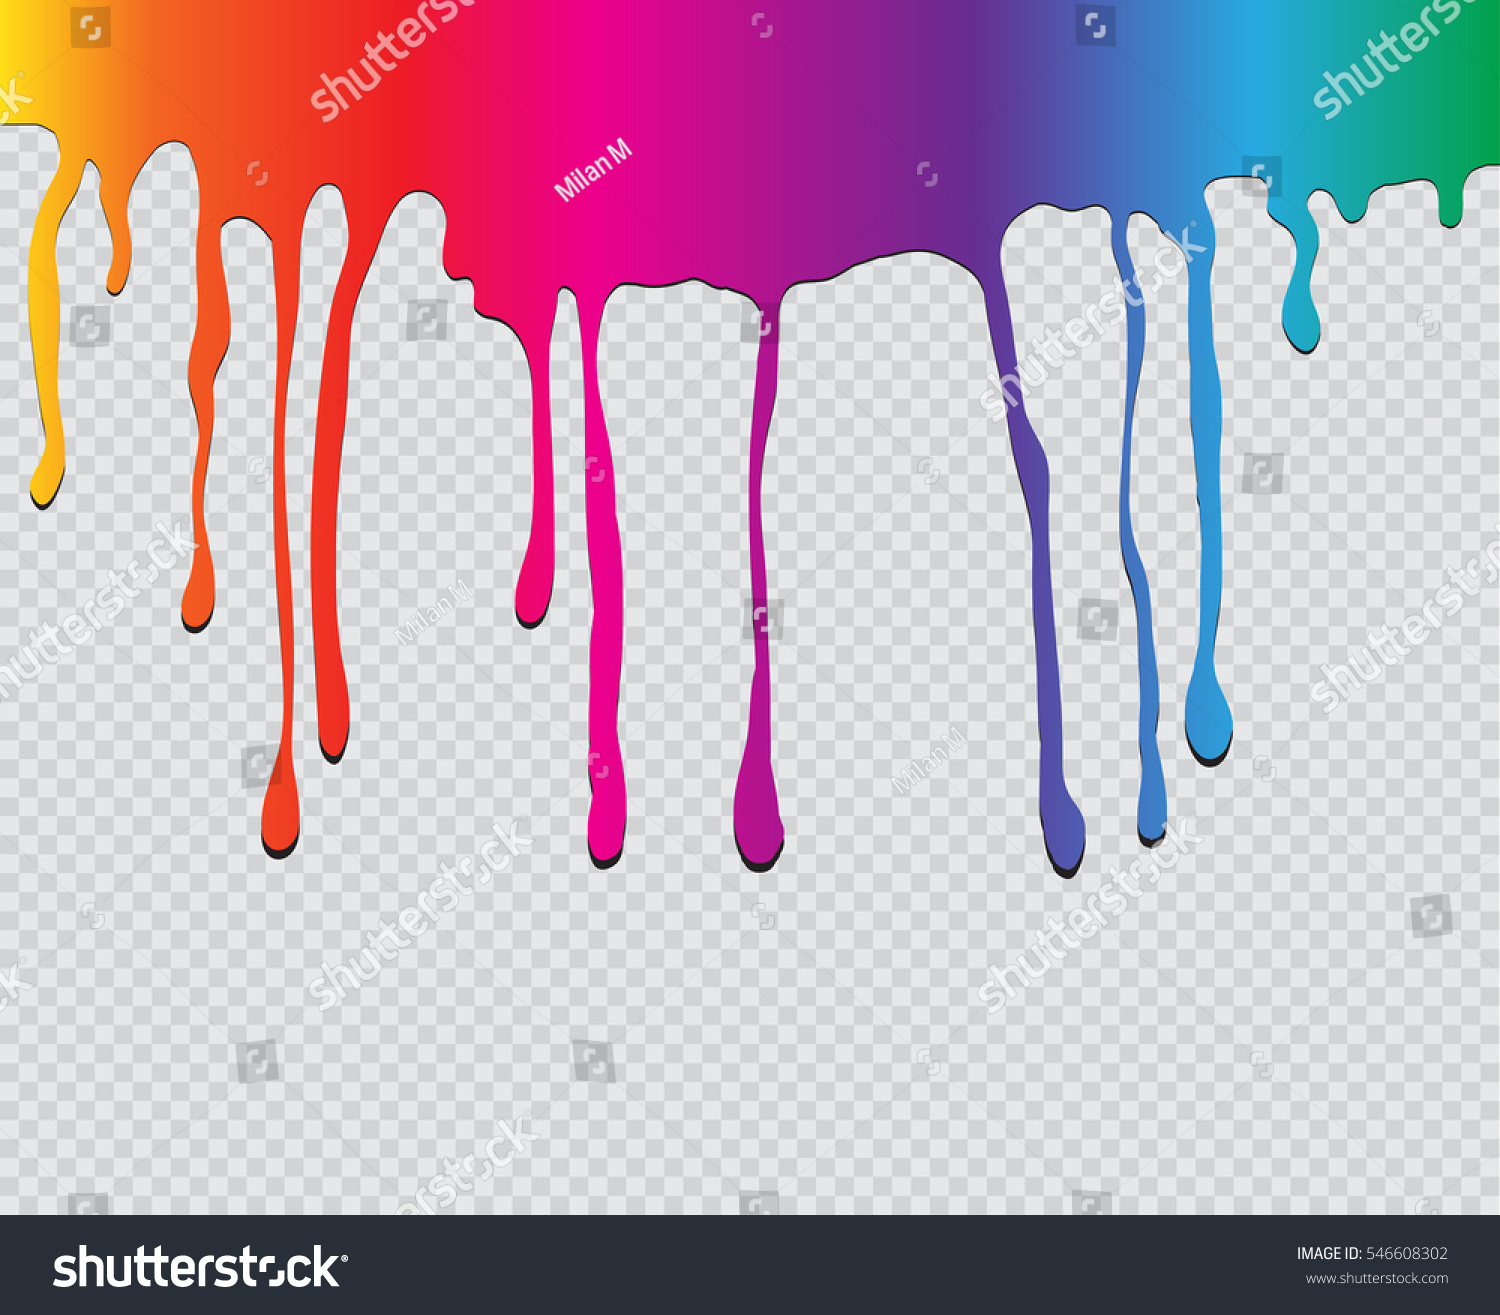 Colorful Paint Dripping Paint Drips Background Vector ...